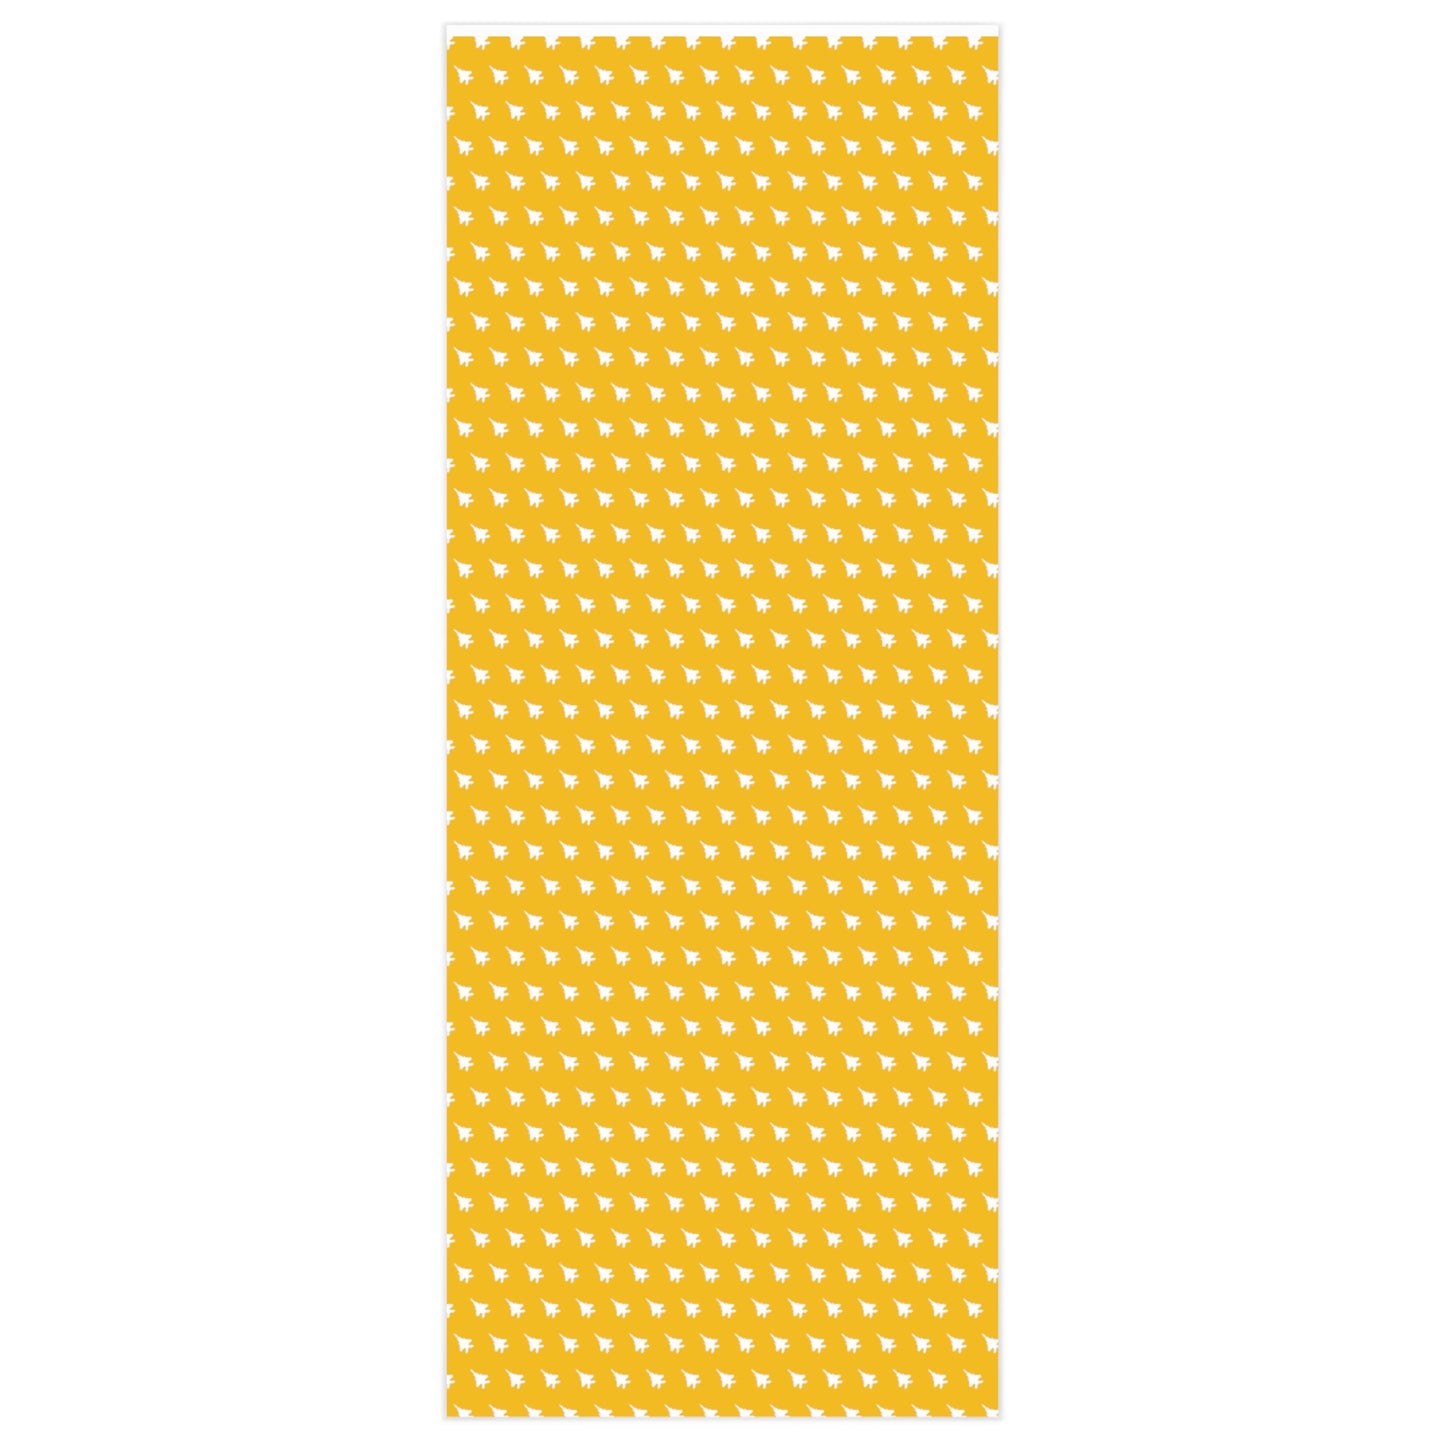 F-15 Wrapping Paper, Yellow